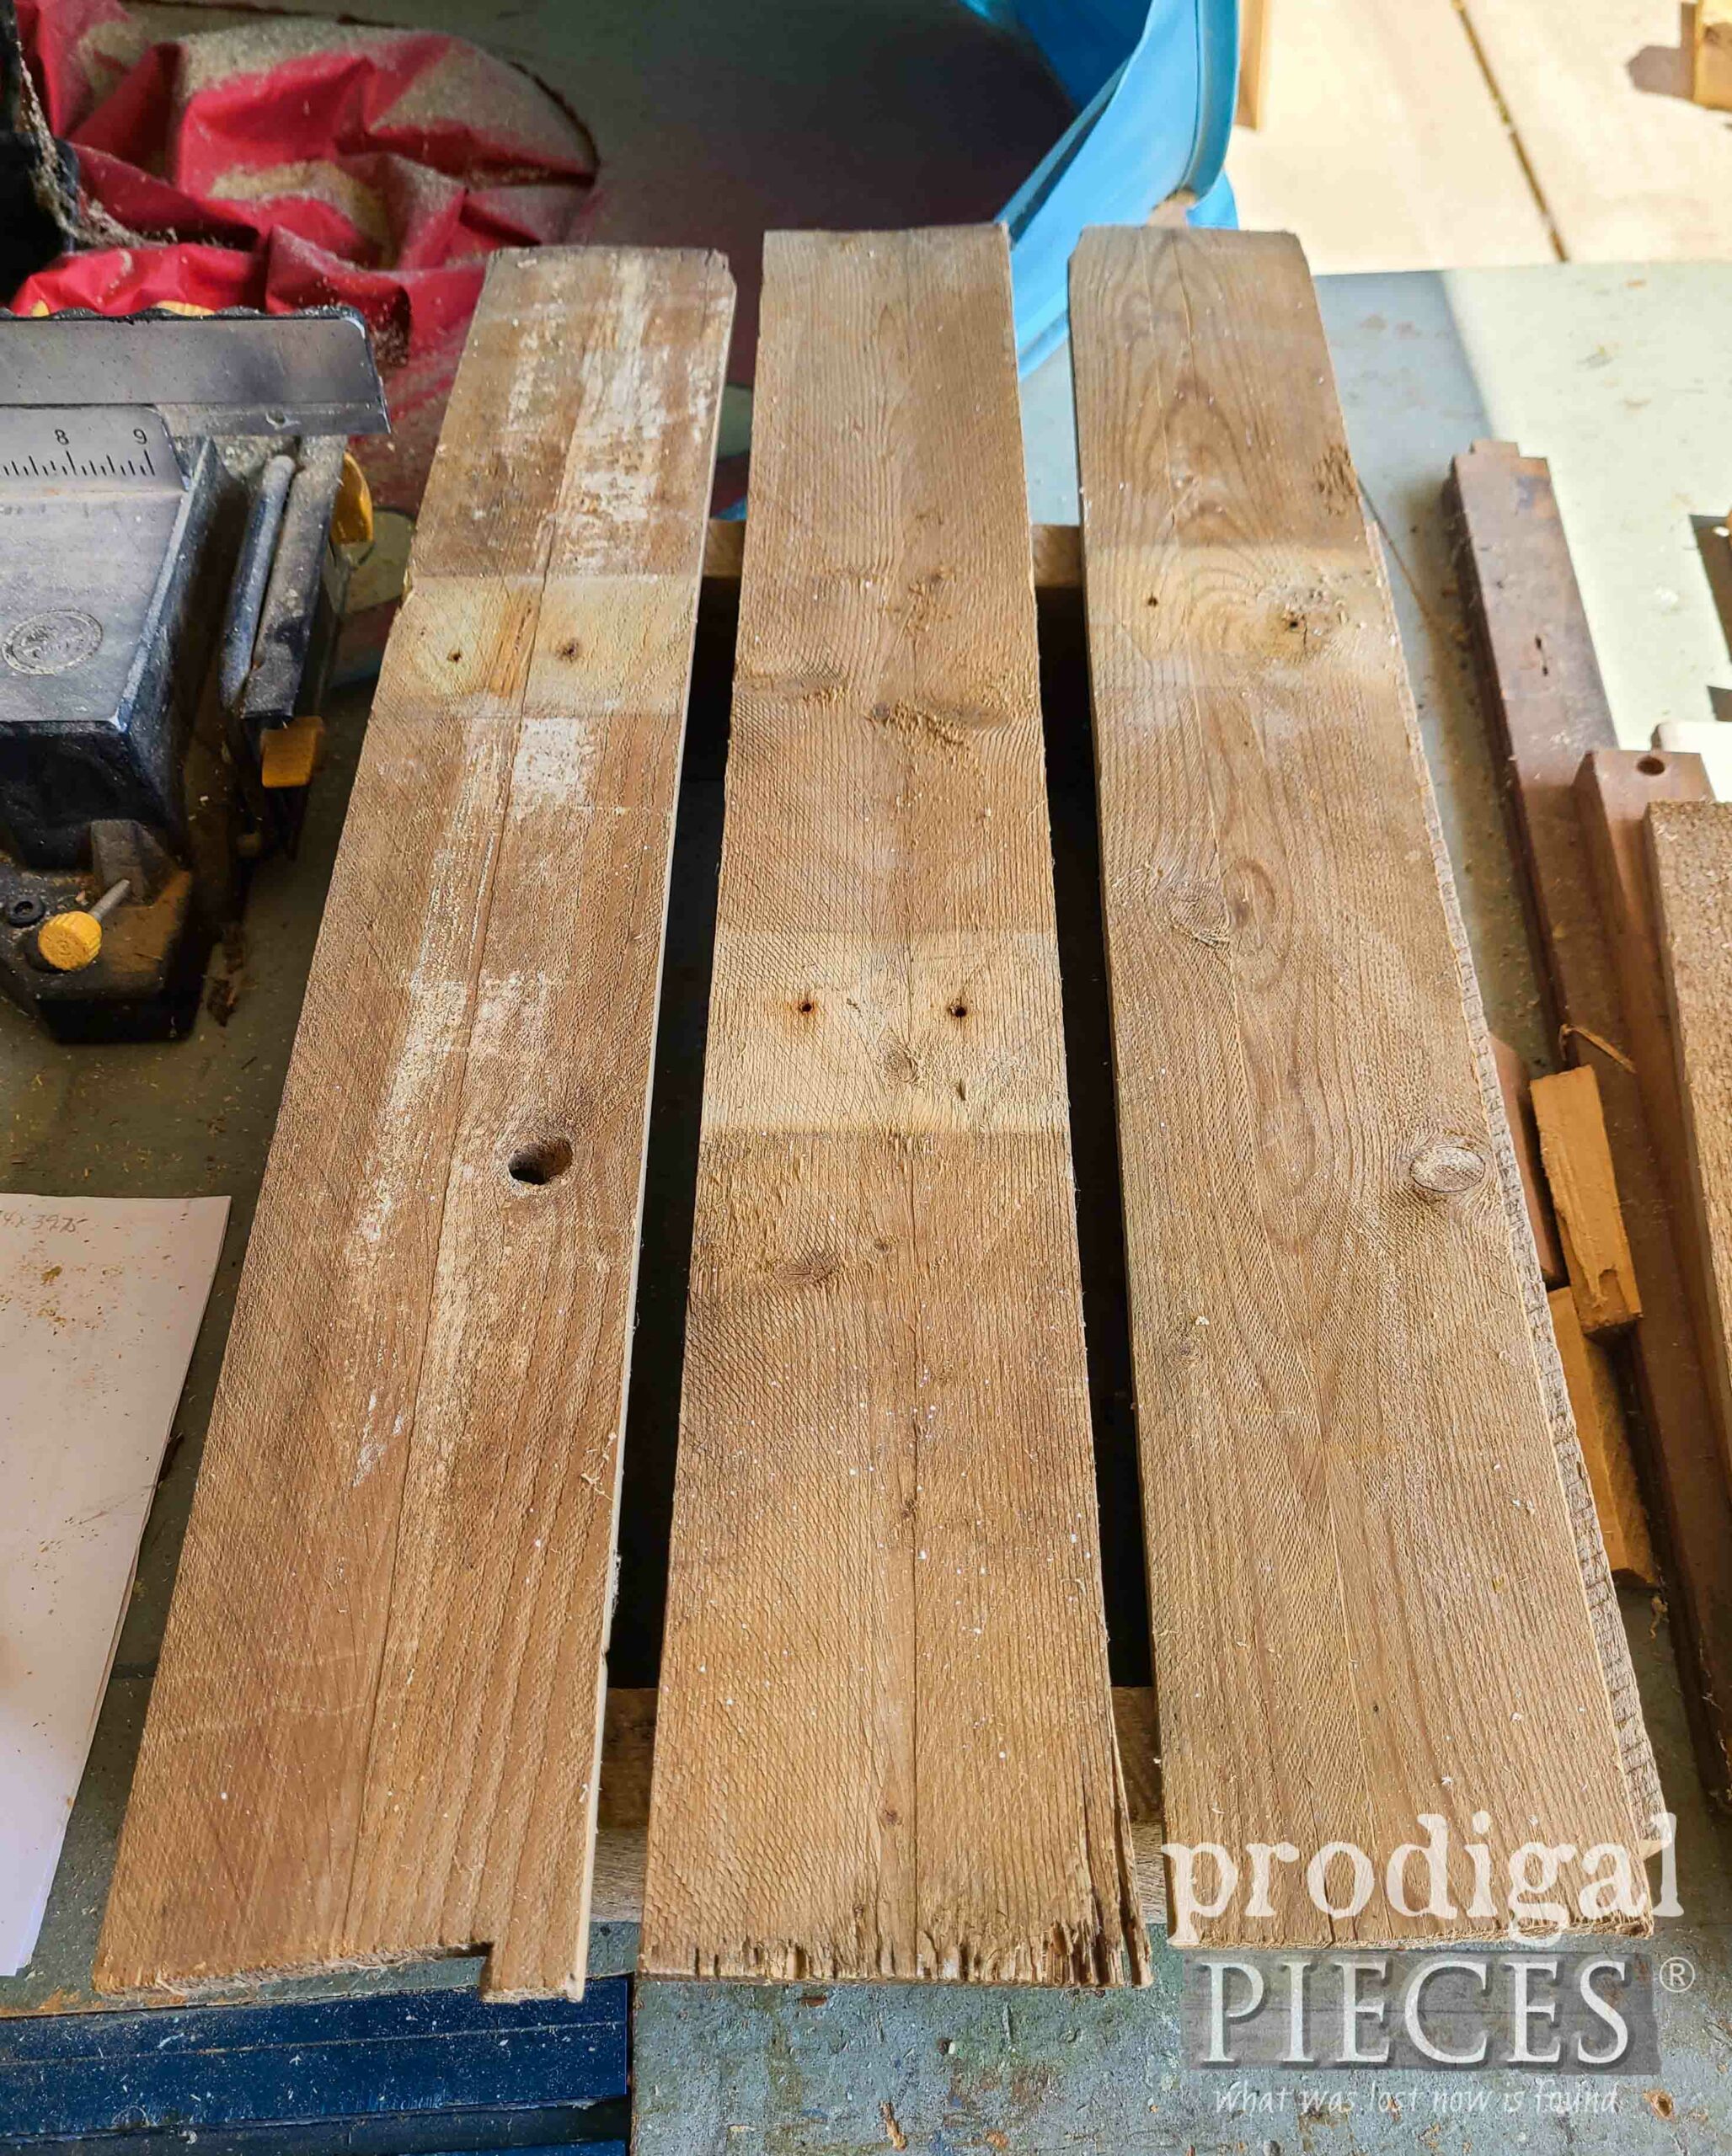 Reclaimed Fence Panels for Tote | prodigalpieces.com #prodigalpieces